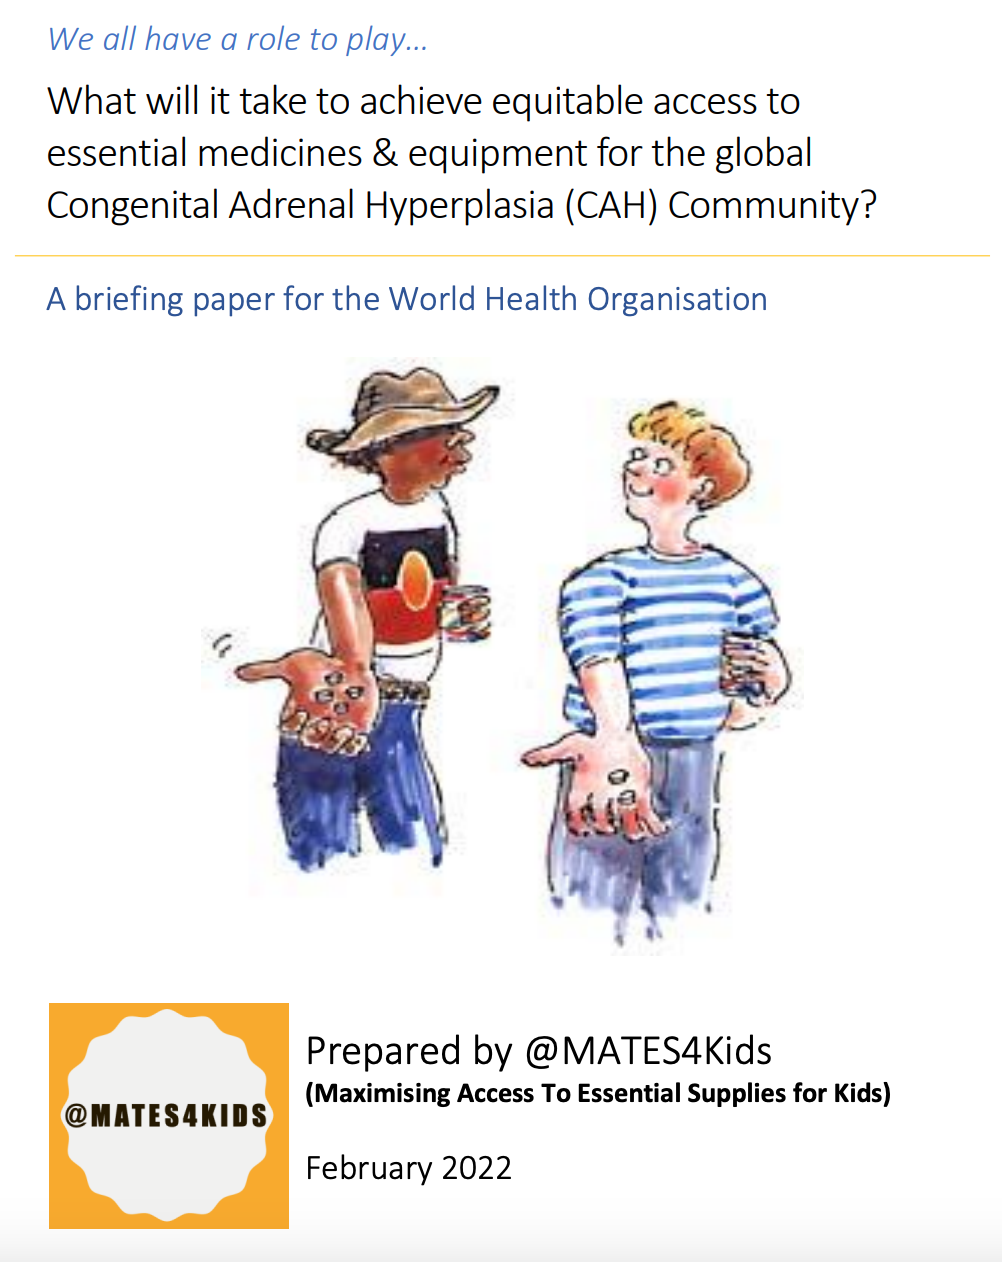 WHO Briefing Paper: What will it take to achieve equitable access to essential medicines & equipment for the global CAH community?